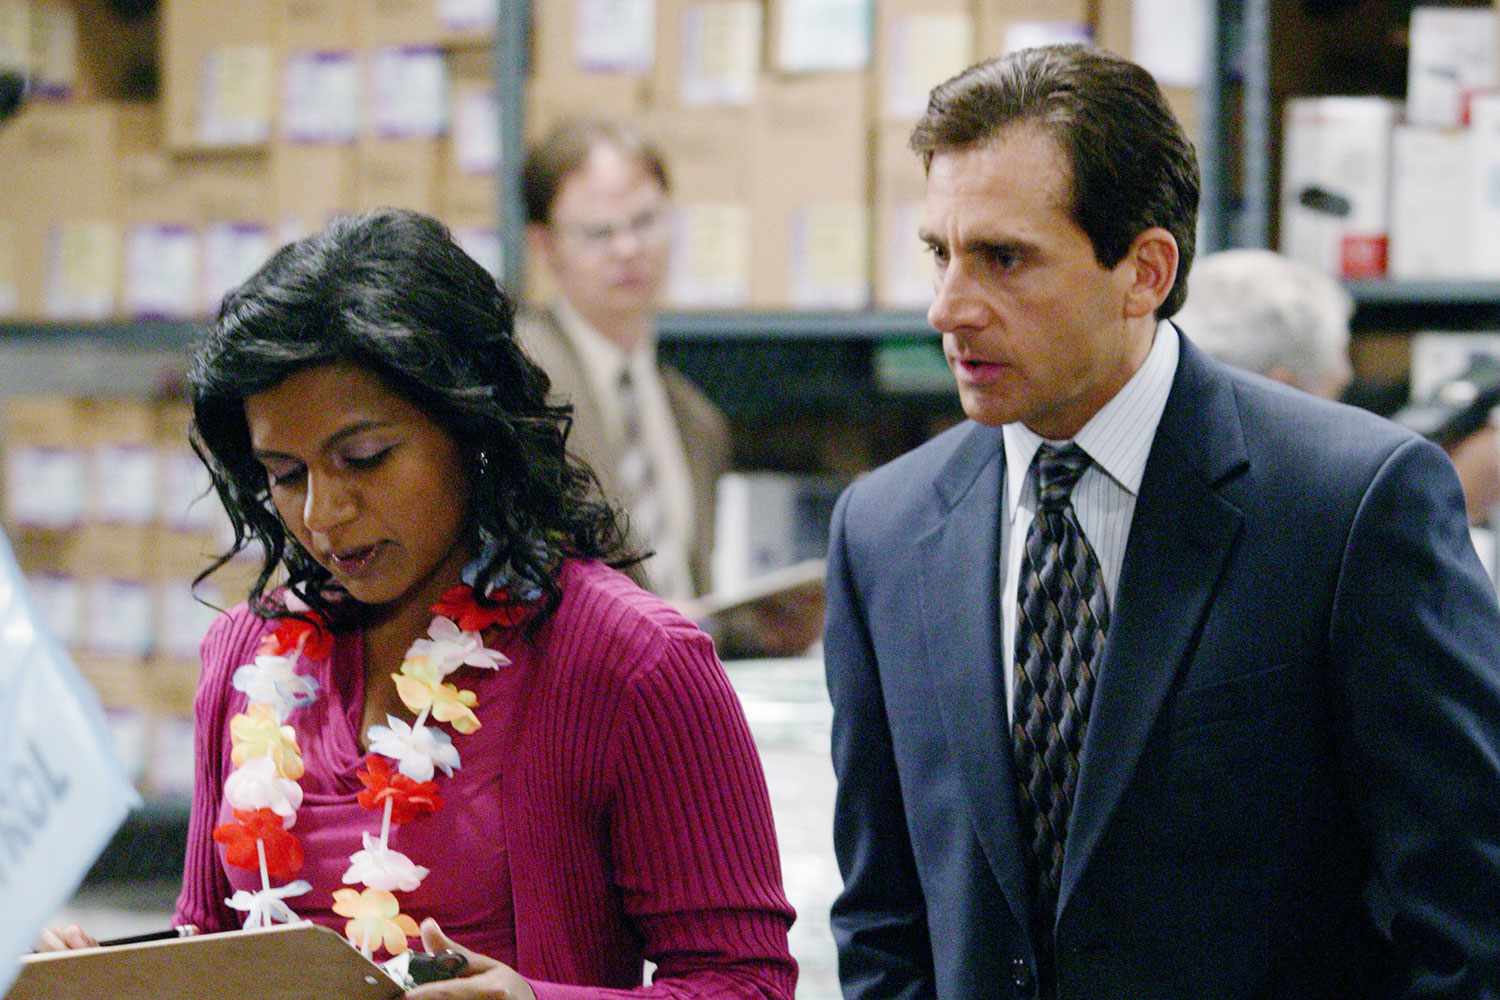 Mindy Kaling and Steve Carell on 'The Office'